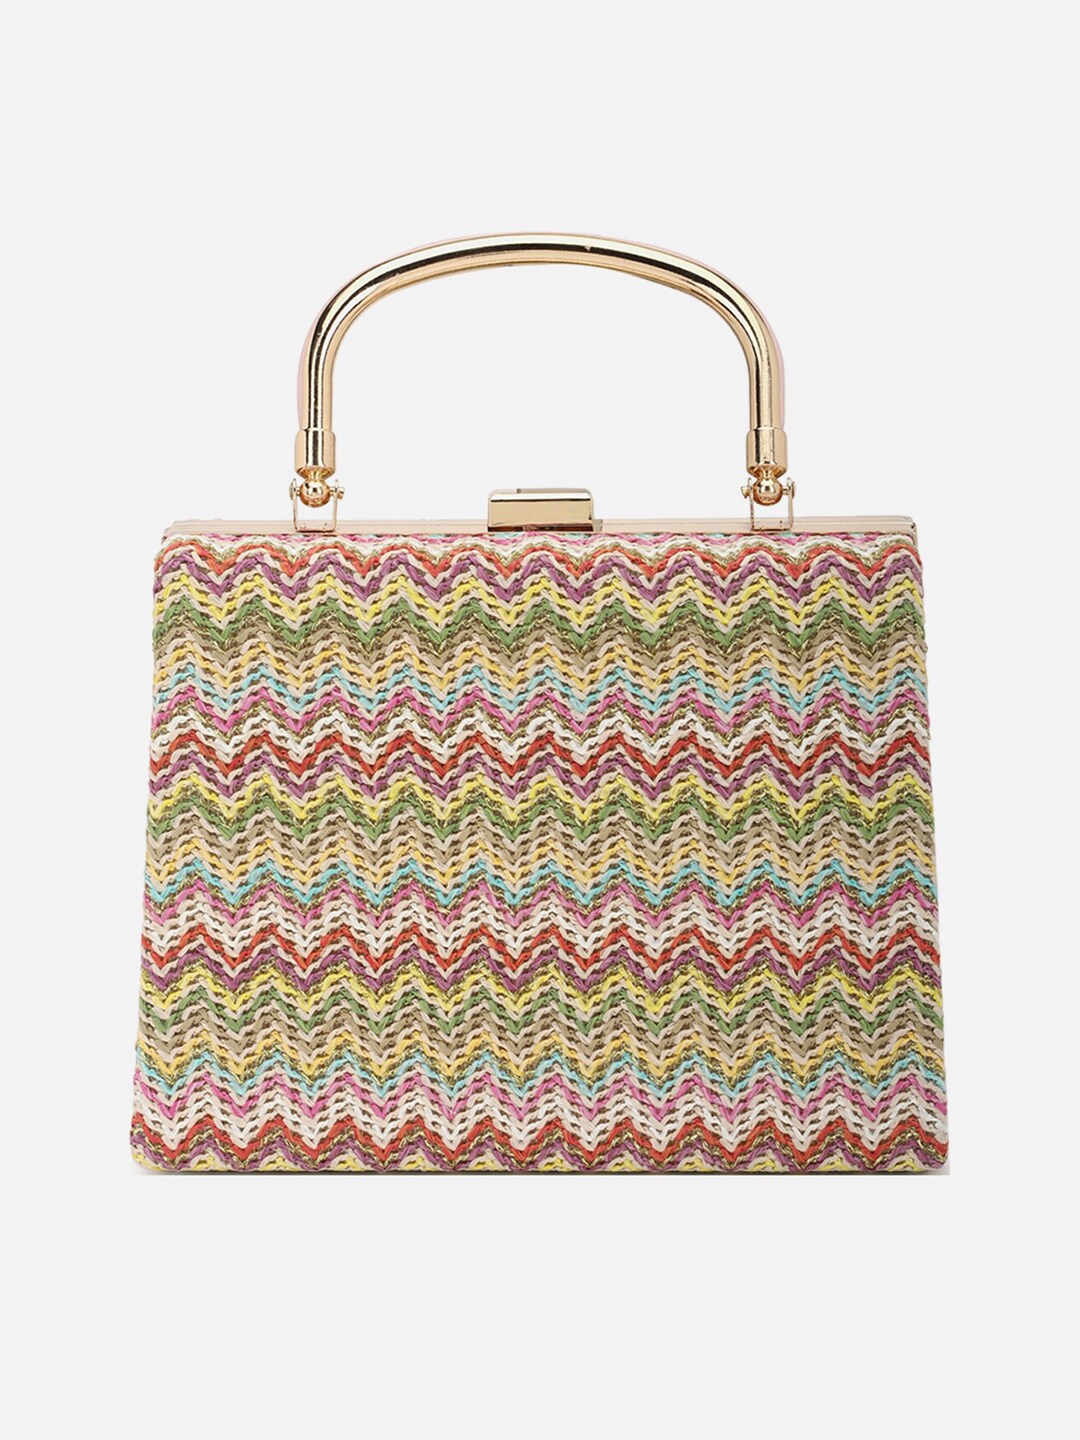 FOREVER 21 Multicoloured Textured PU Oversized Structured Handheld Bag Price in India